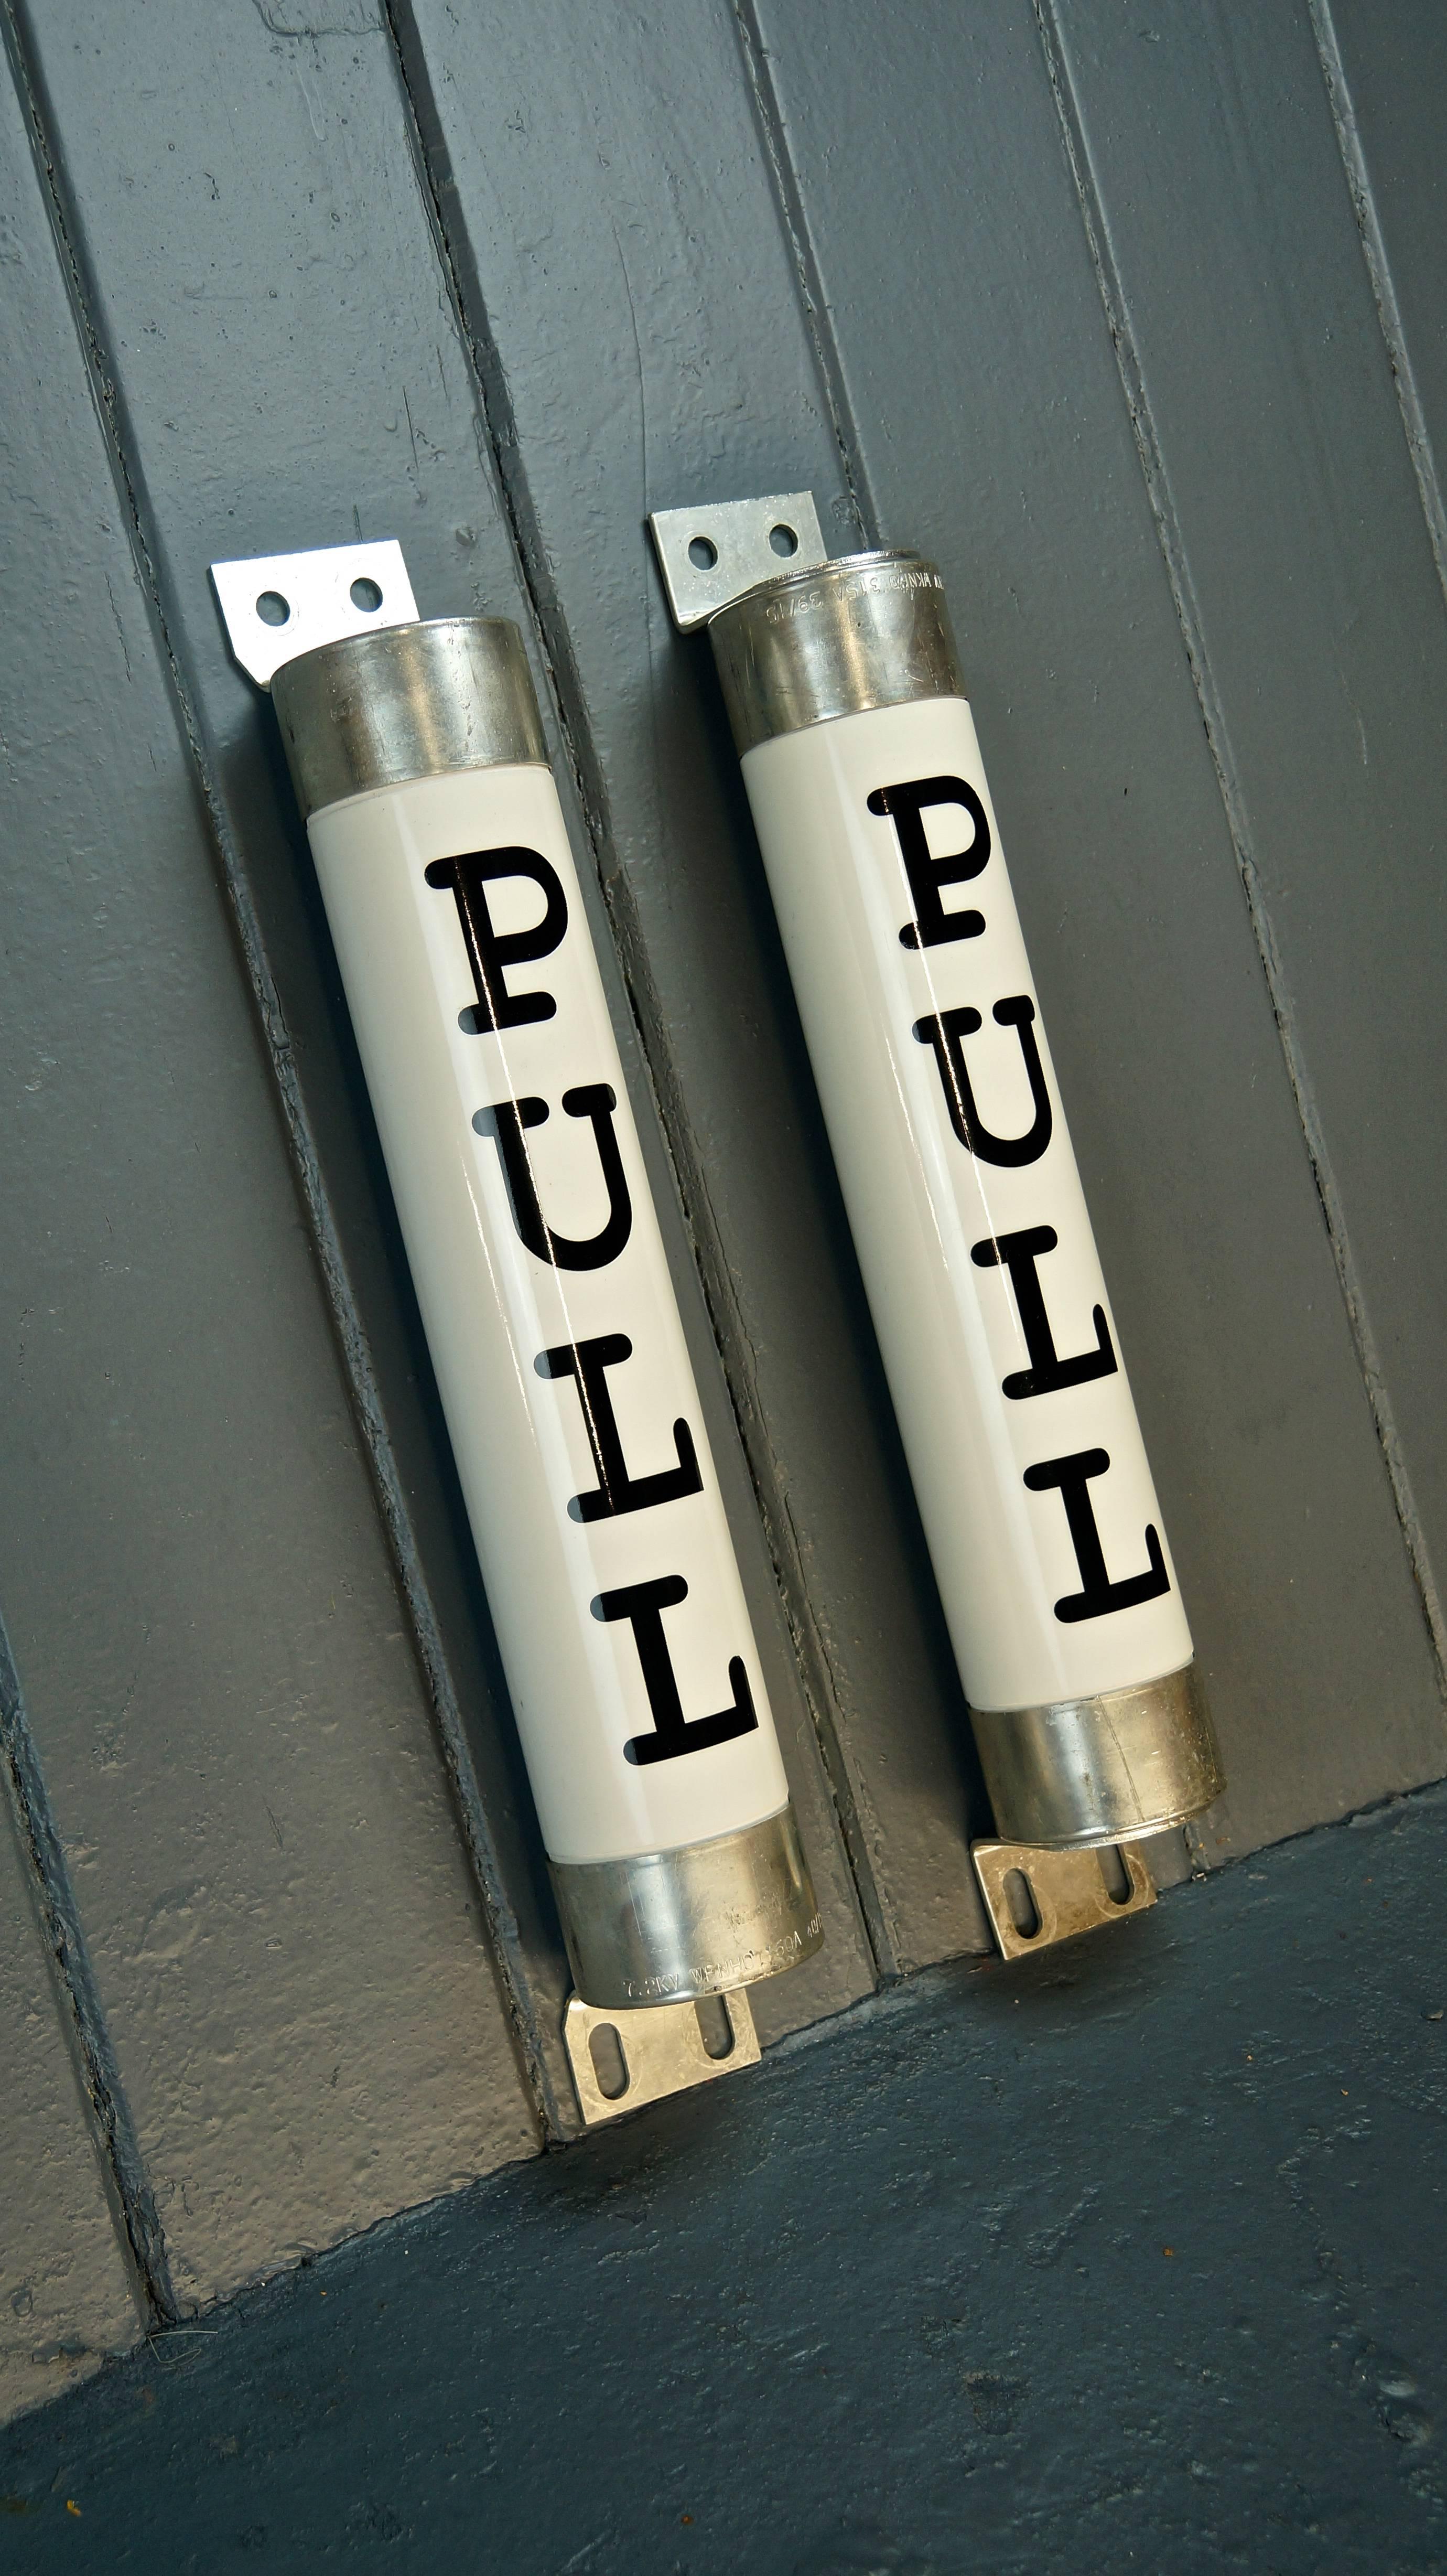 Late 20th Century Industrial Glazed Porcelain 7.2 Kilovolt Fuses Converted into Door Handles, Pair